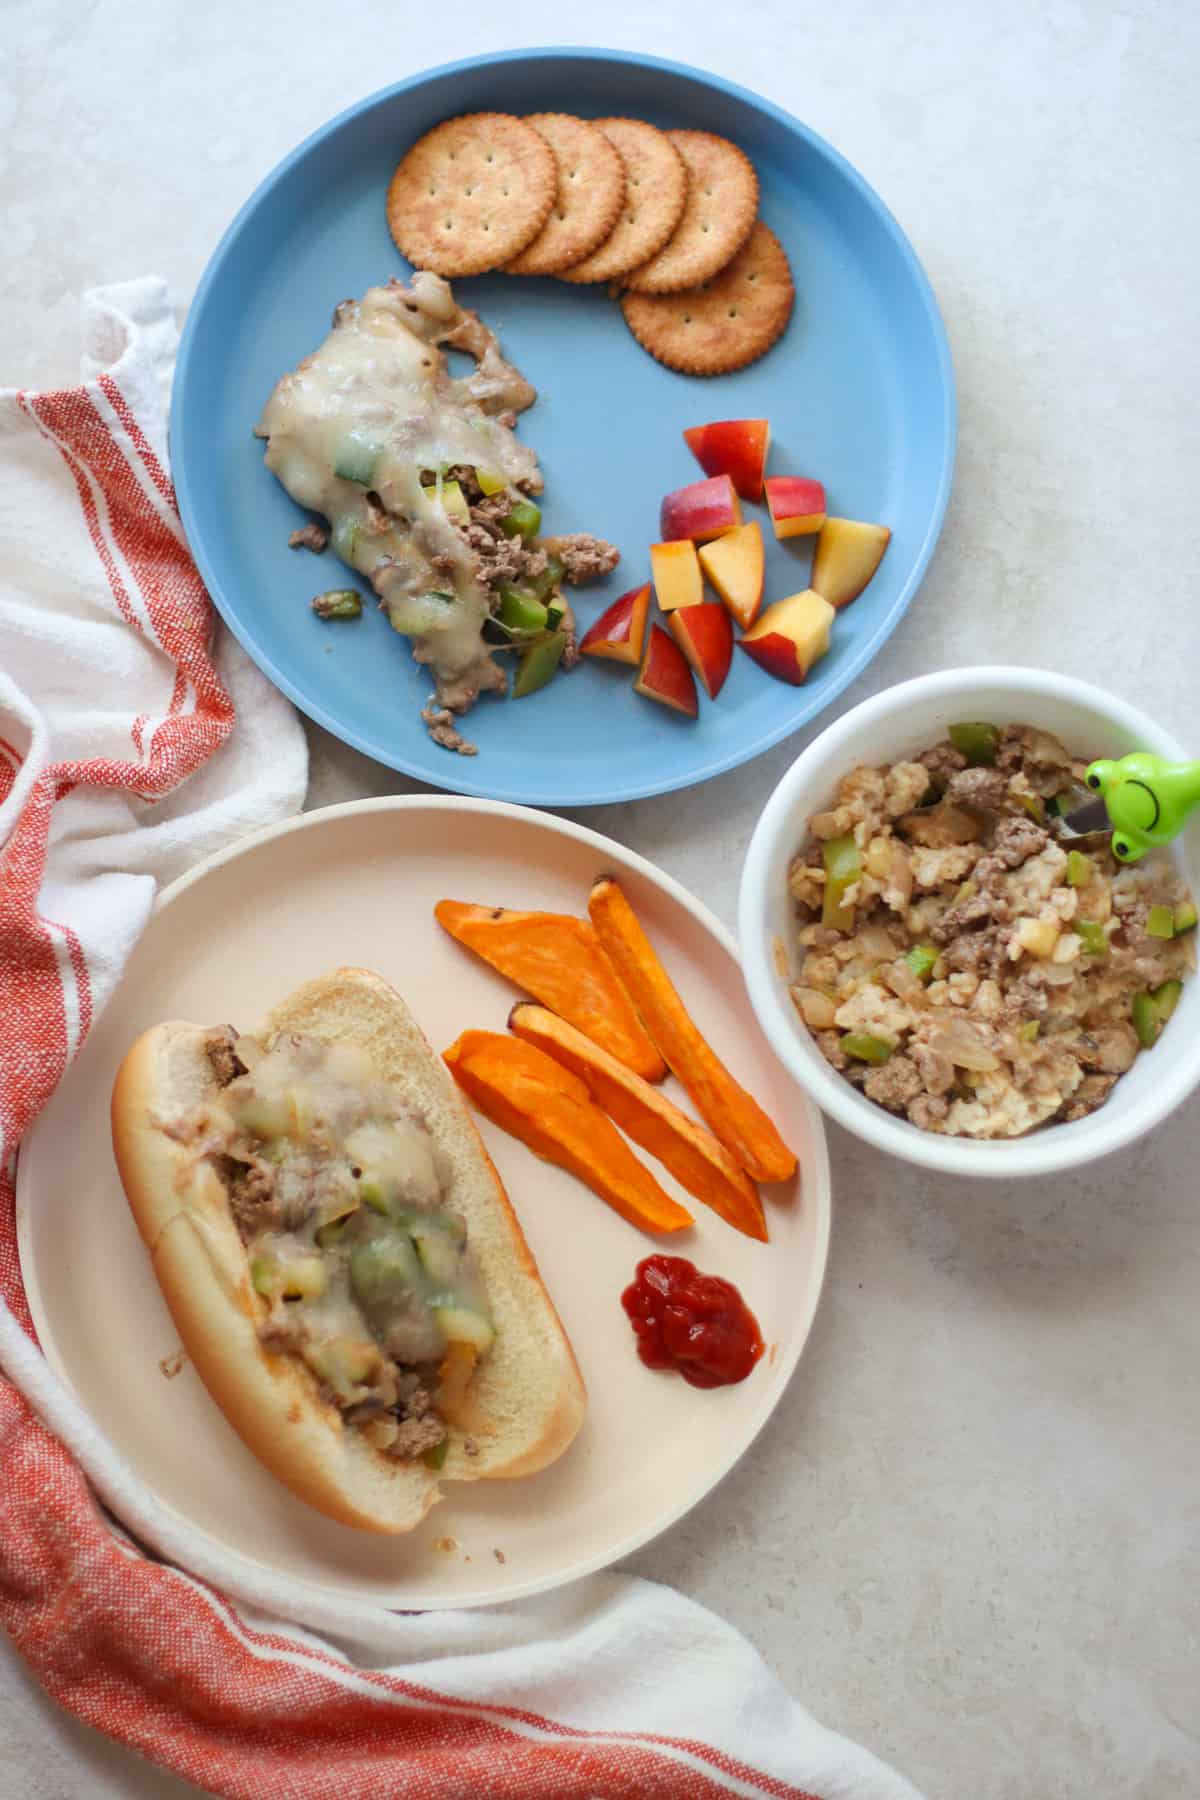 Cheese steak casserole served three ways as a sandwich, deconstructed with crackers, and mixed with oatmeal.